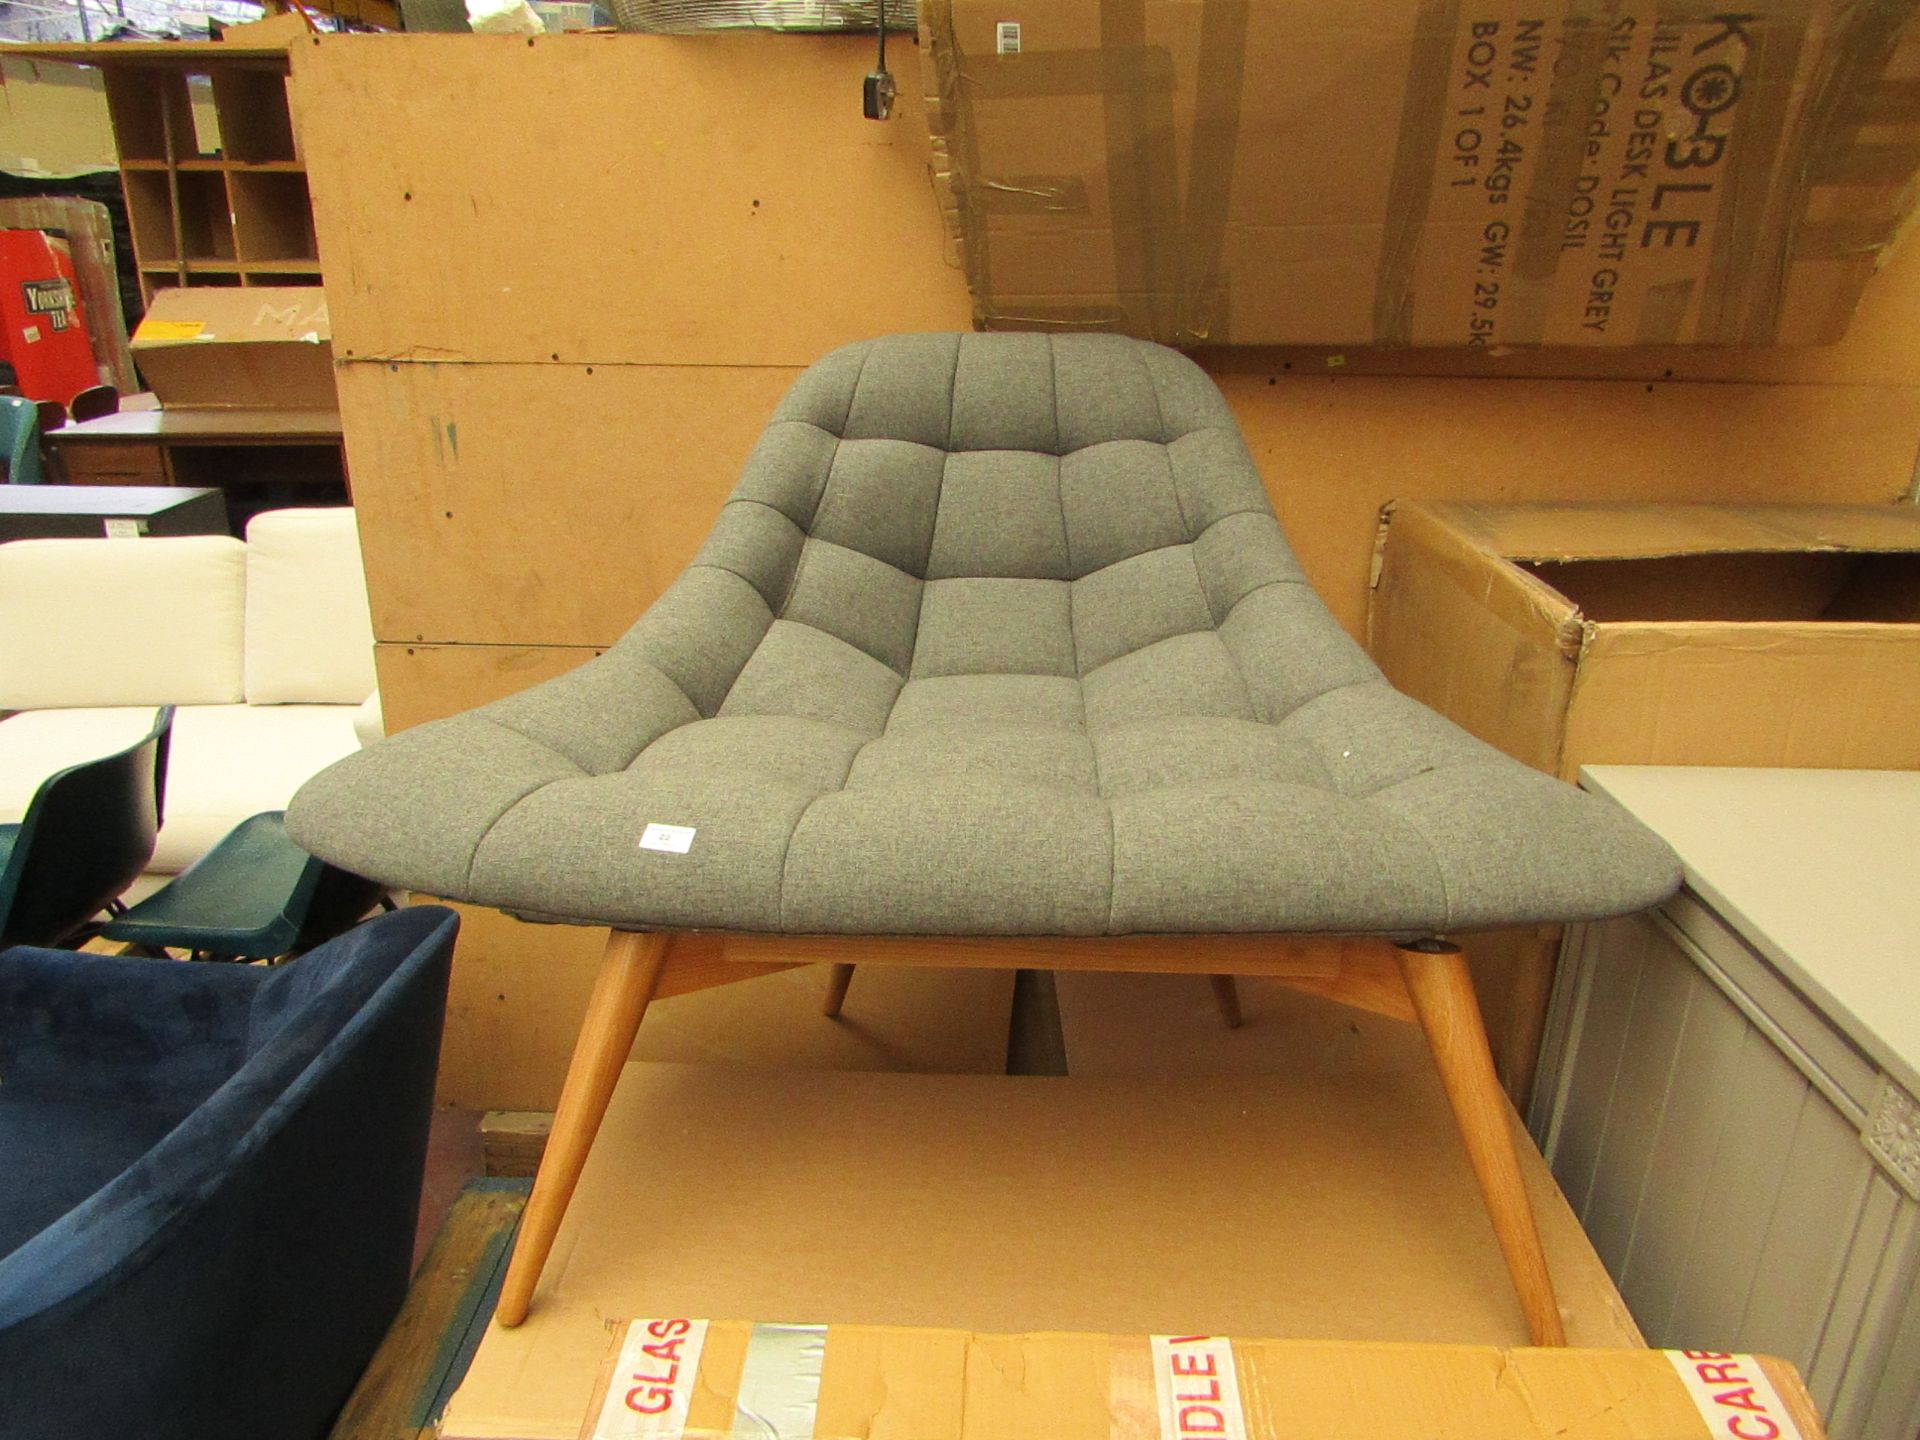 | 1x | MADE.COM KOLTON ACCENT CHAIR IN GREY | LOOKS TO BE IN VERY GOOD CONDITION WITH BOX | RRP œ449